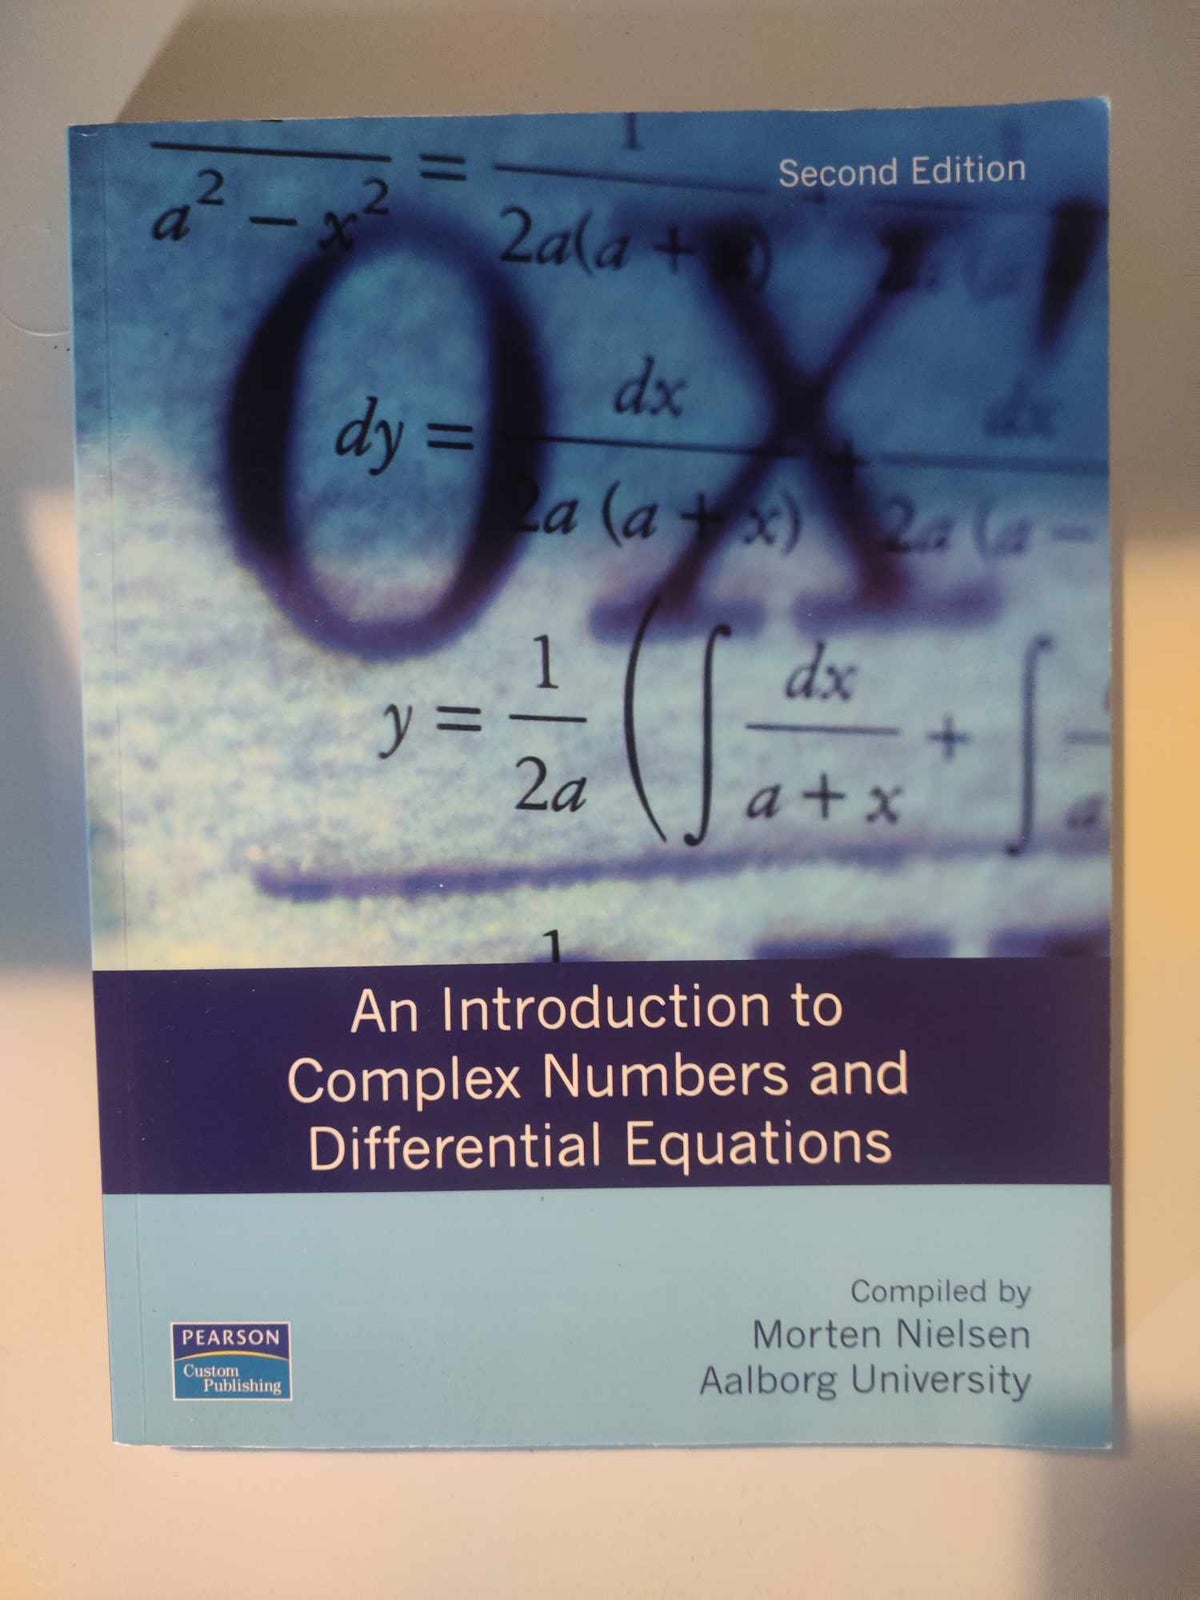 An Introduction to Complex Numbers and[...], Morten